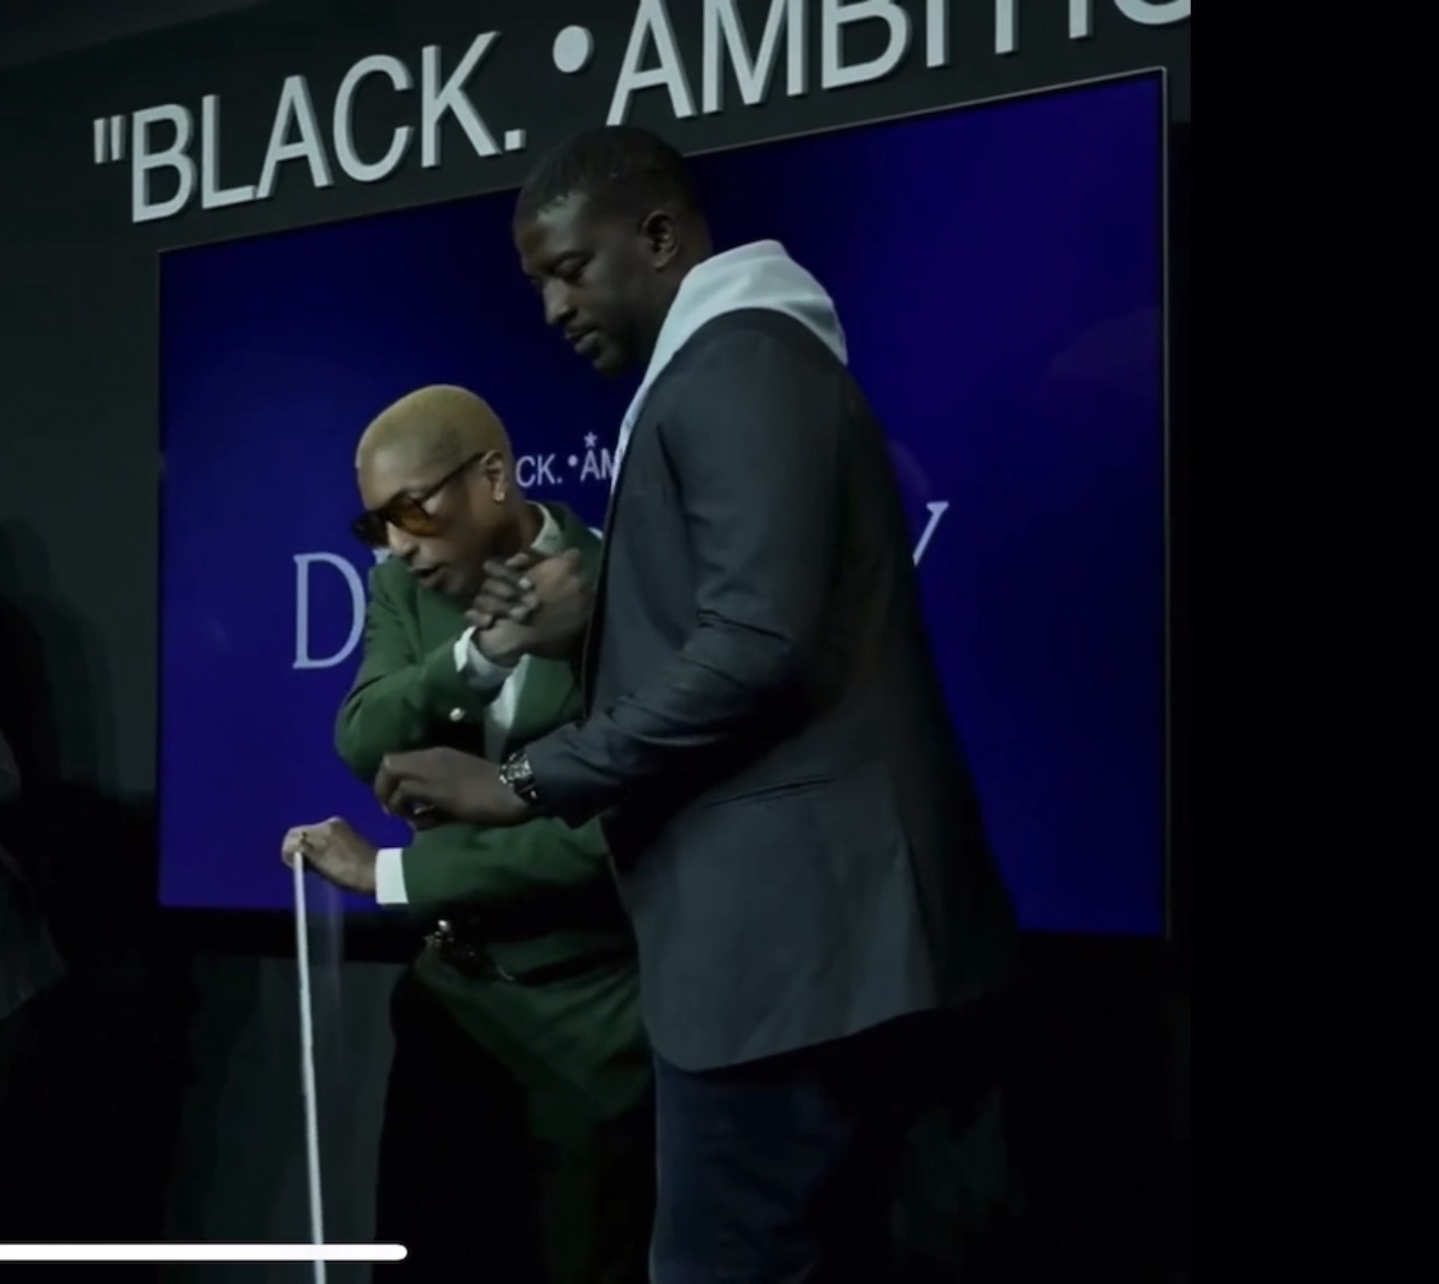 Indigenius Gets Backing From Pharrell's Black Ambition Prize